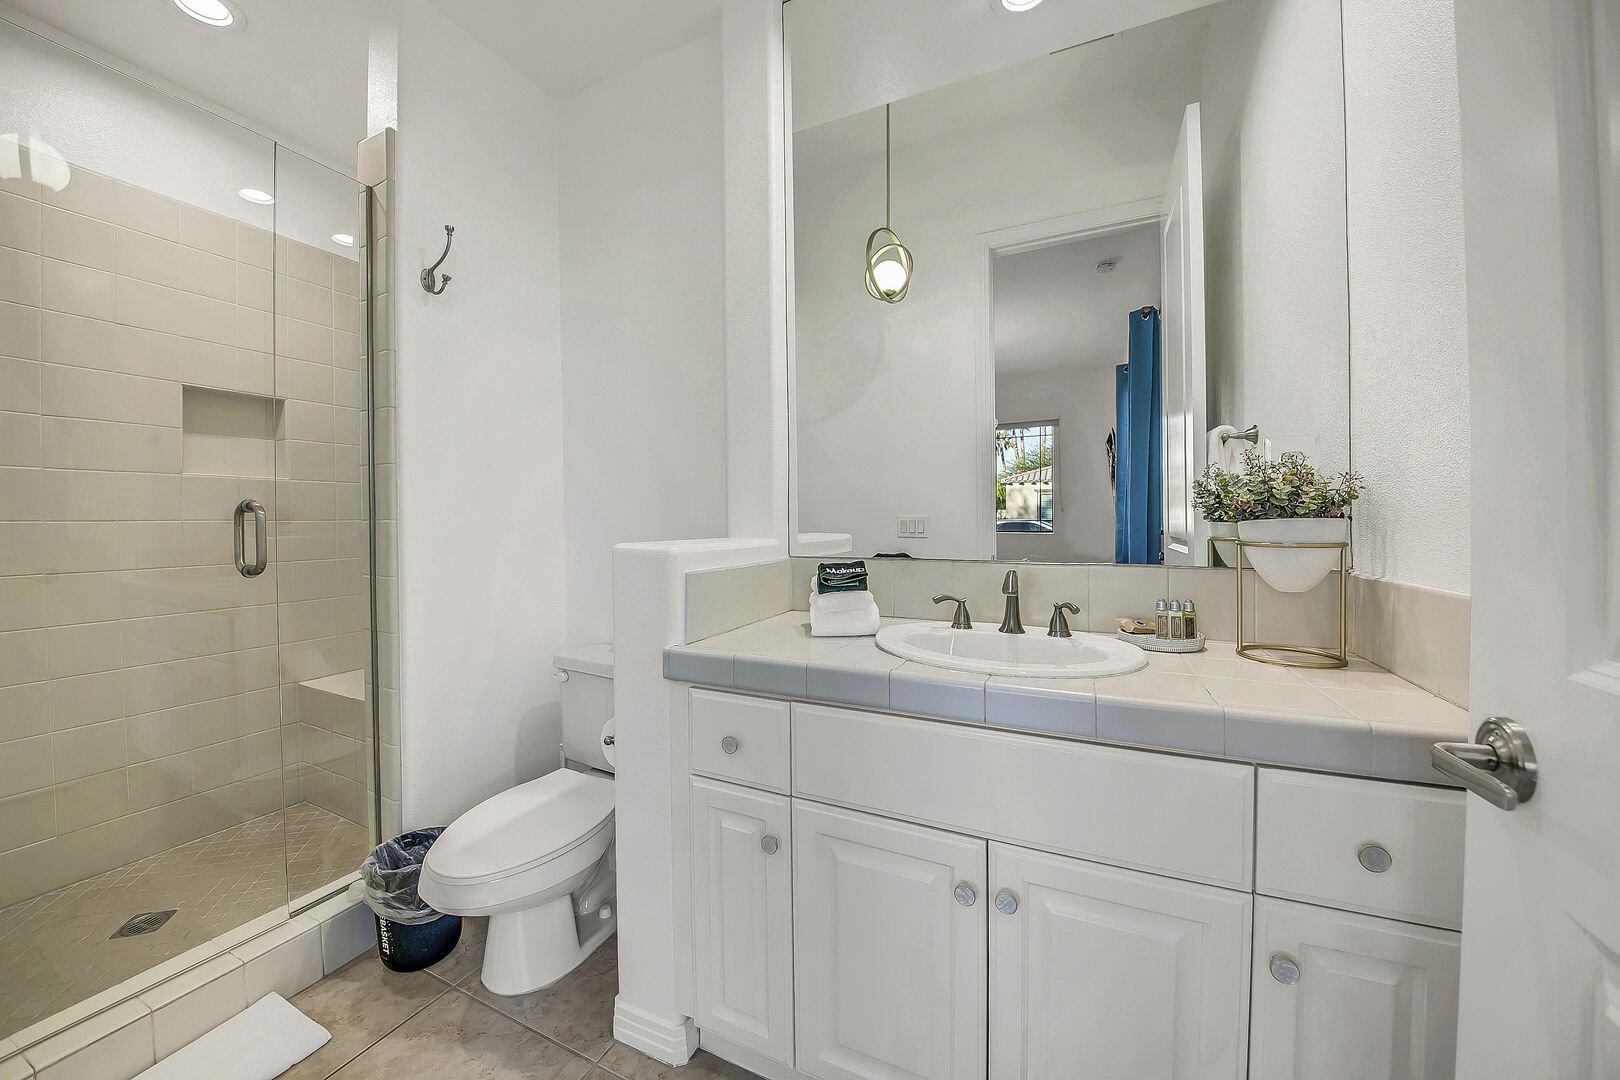 The private casita en suite bathroom features a tile shower and a vanity sink.